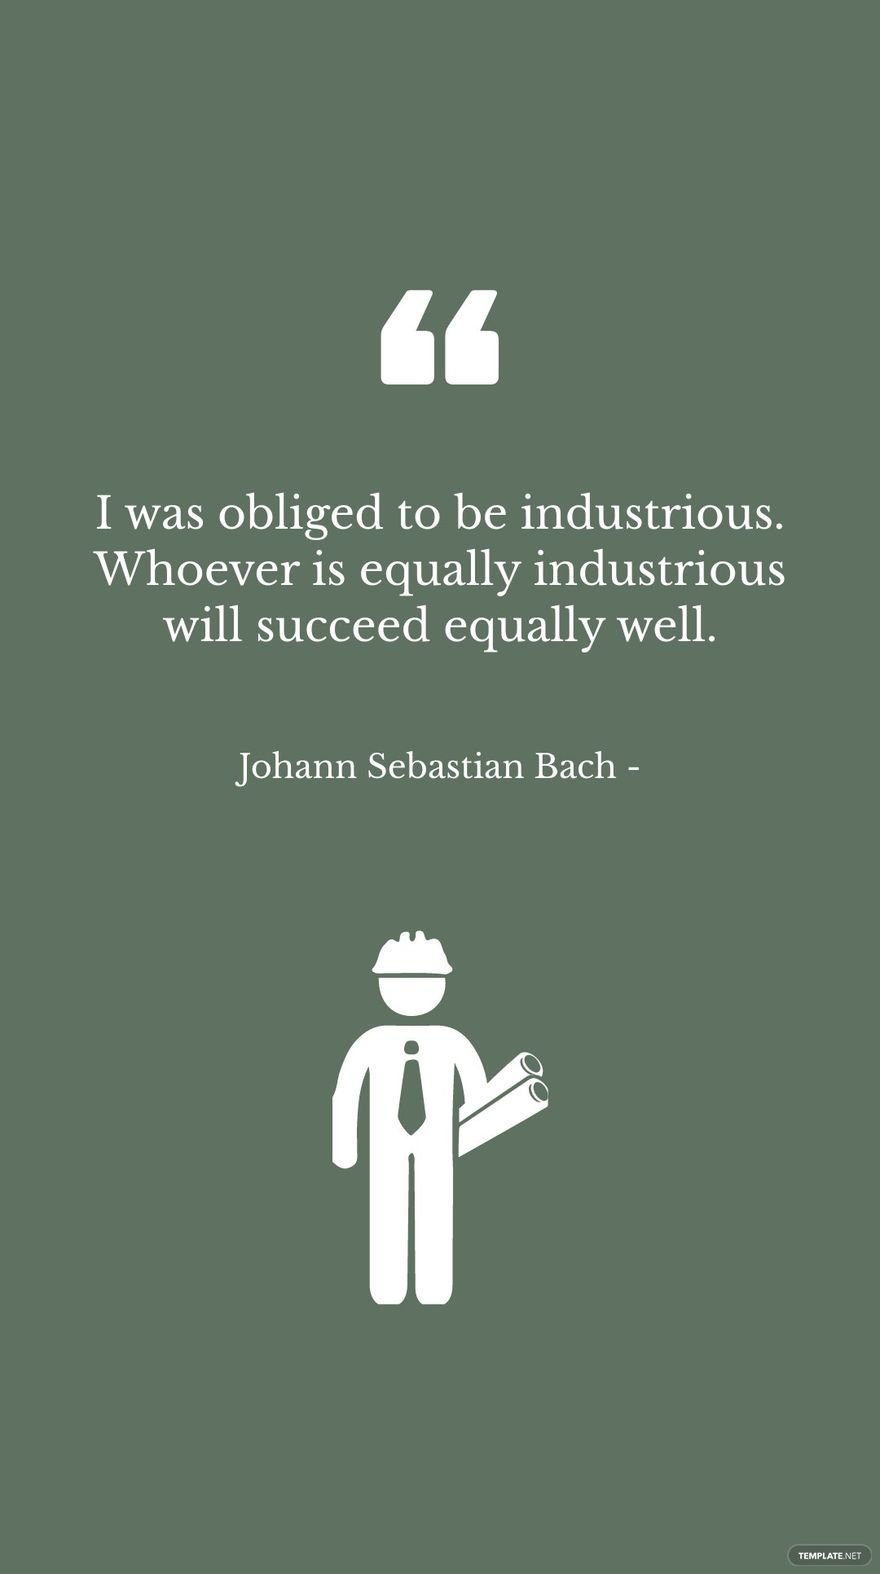 Free Johann Sebastian Bach - I was obliged to be industrious. Whoever is equally industrious will succeed equally well.